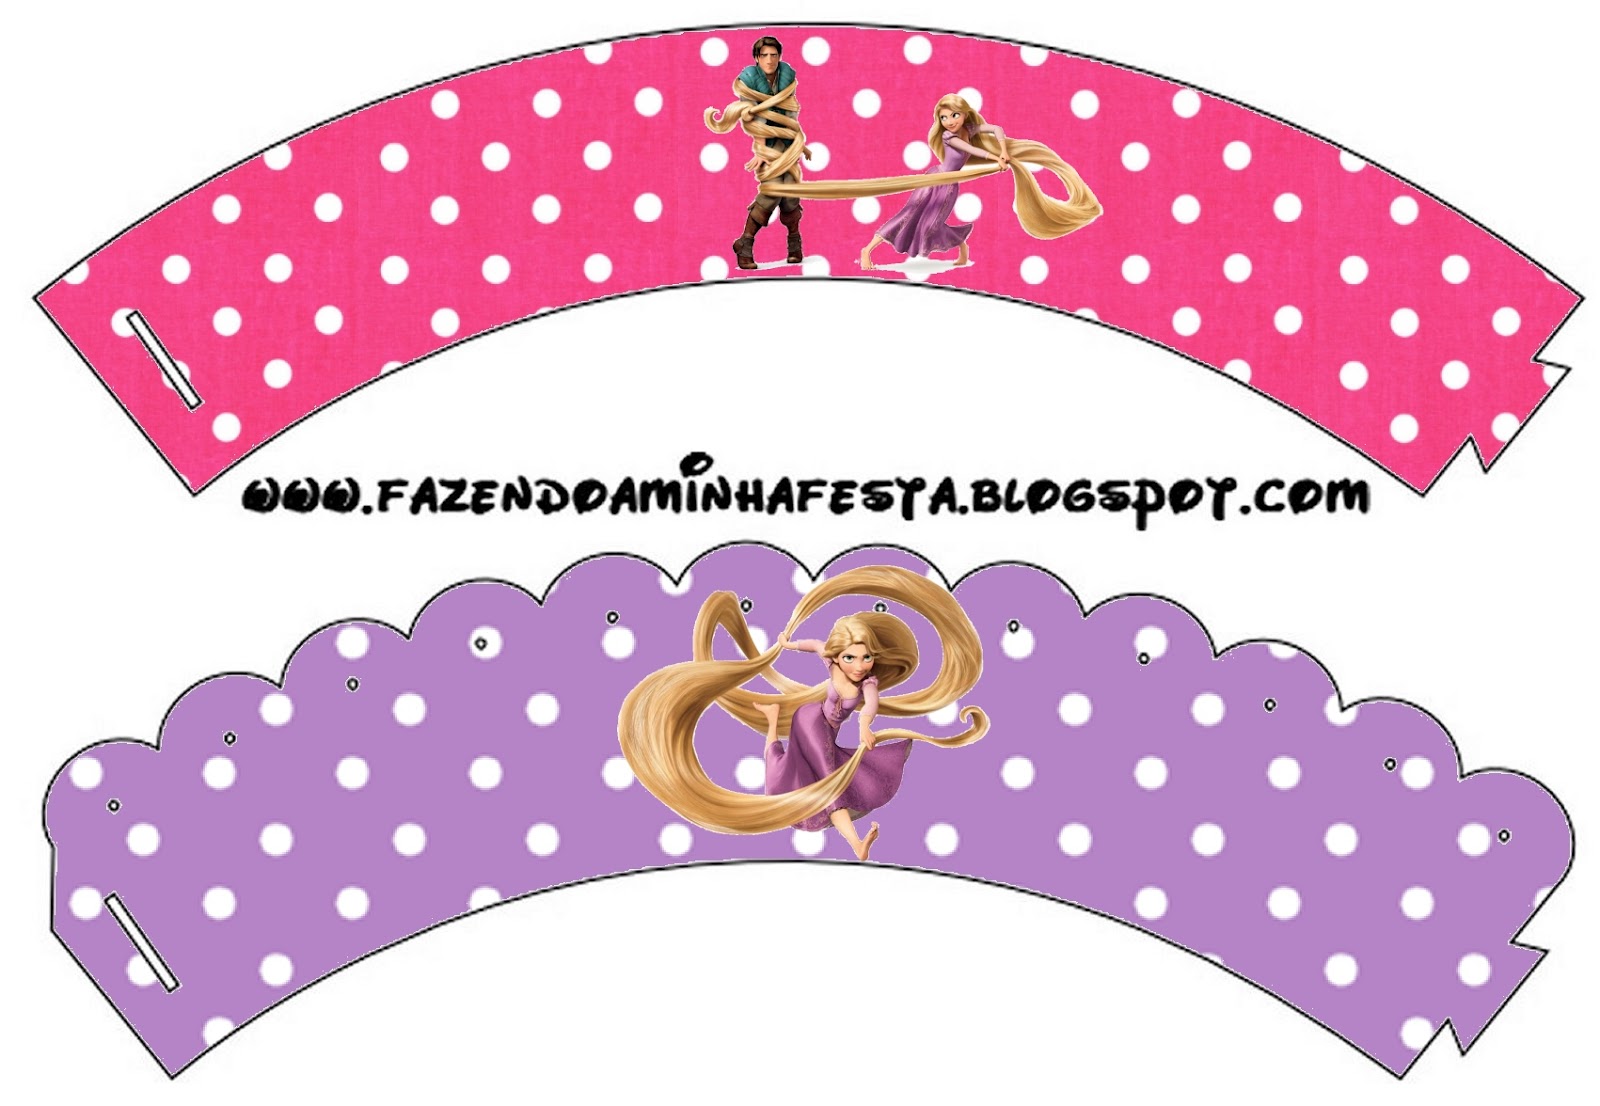 tangled-rapunzel-party-free-printables-oh-my-fiesta-in-english